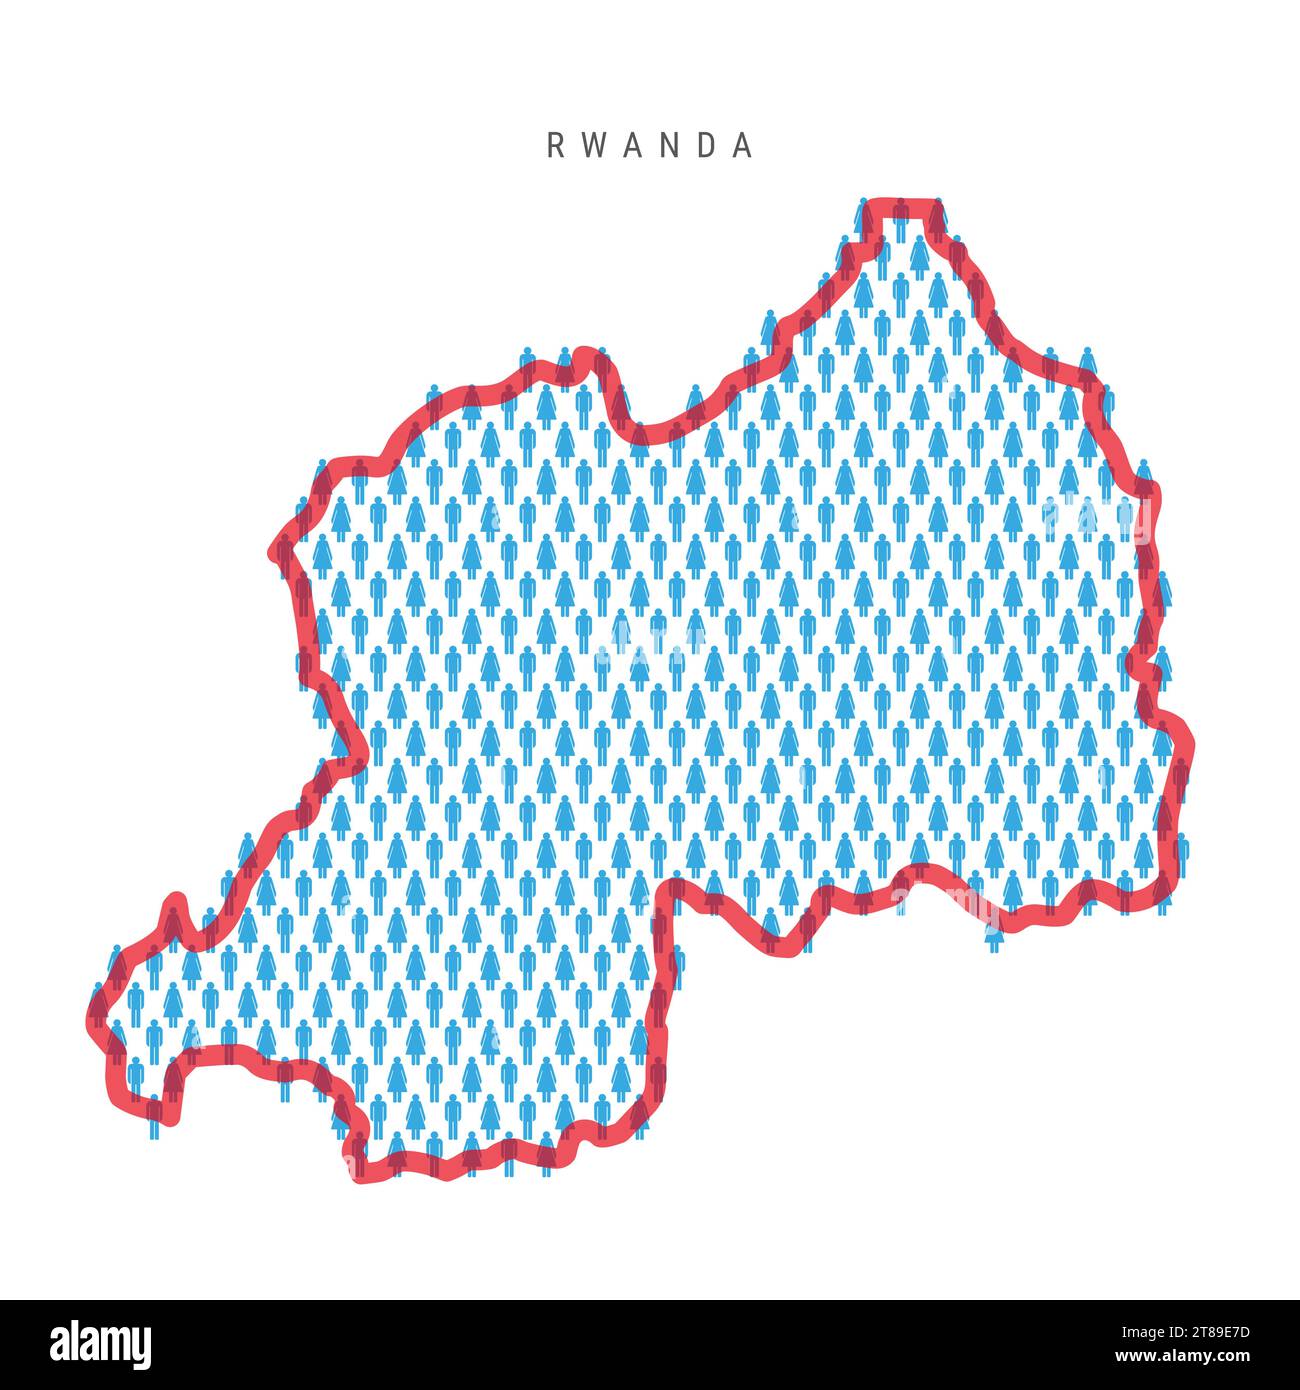 Rwanda population map. Stick figures Rwandan people map with bold red translucent country border. Pattern of men and women icons. Isolated vector illu Stock Vector